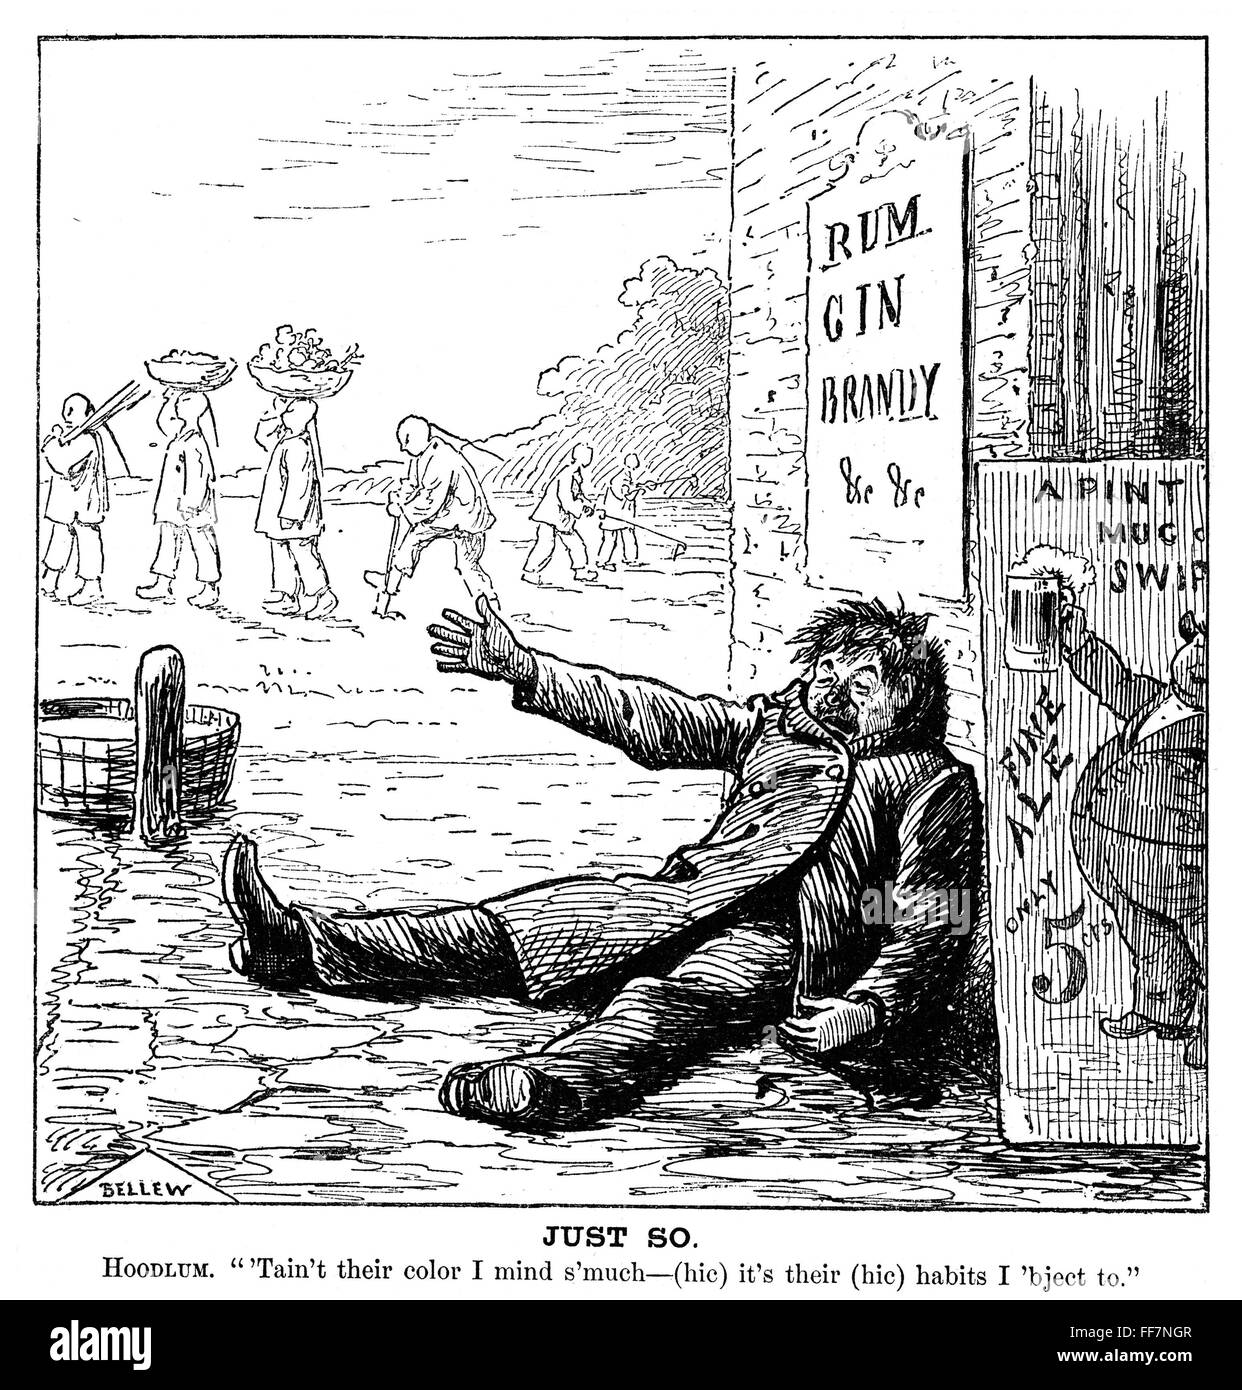 IMMIGRATION CARTOON, 1879. /n'Just So': American cartoon by Frank Bellew,  1879, ridiculing Irish contempt for Chinese immigrants by inviting contempt  for the Irish immigrants Stock Photo - Alamy